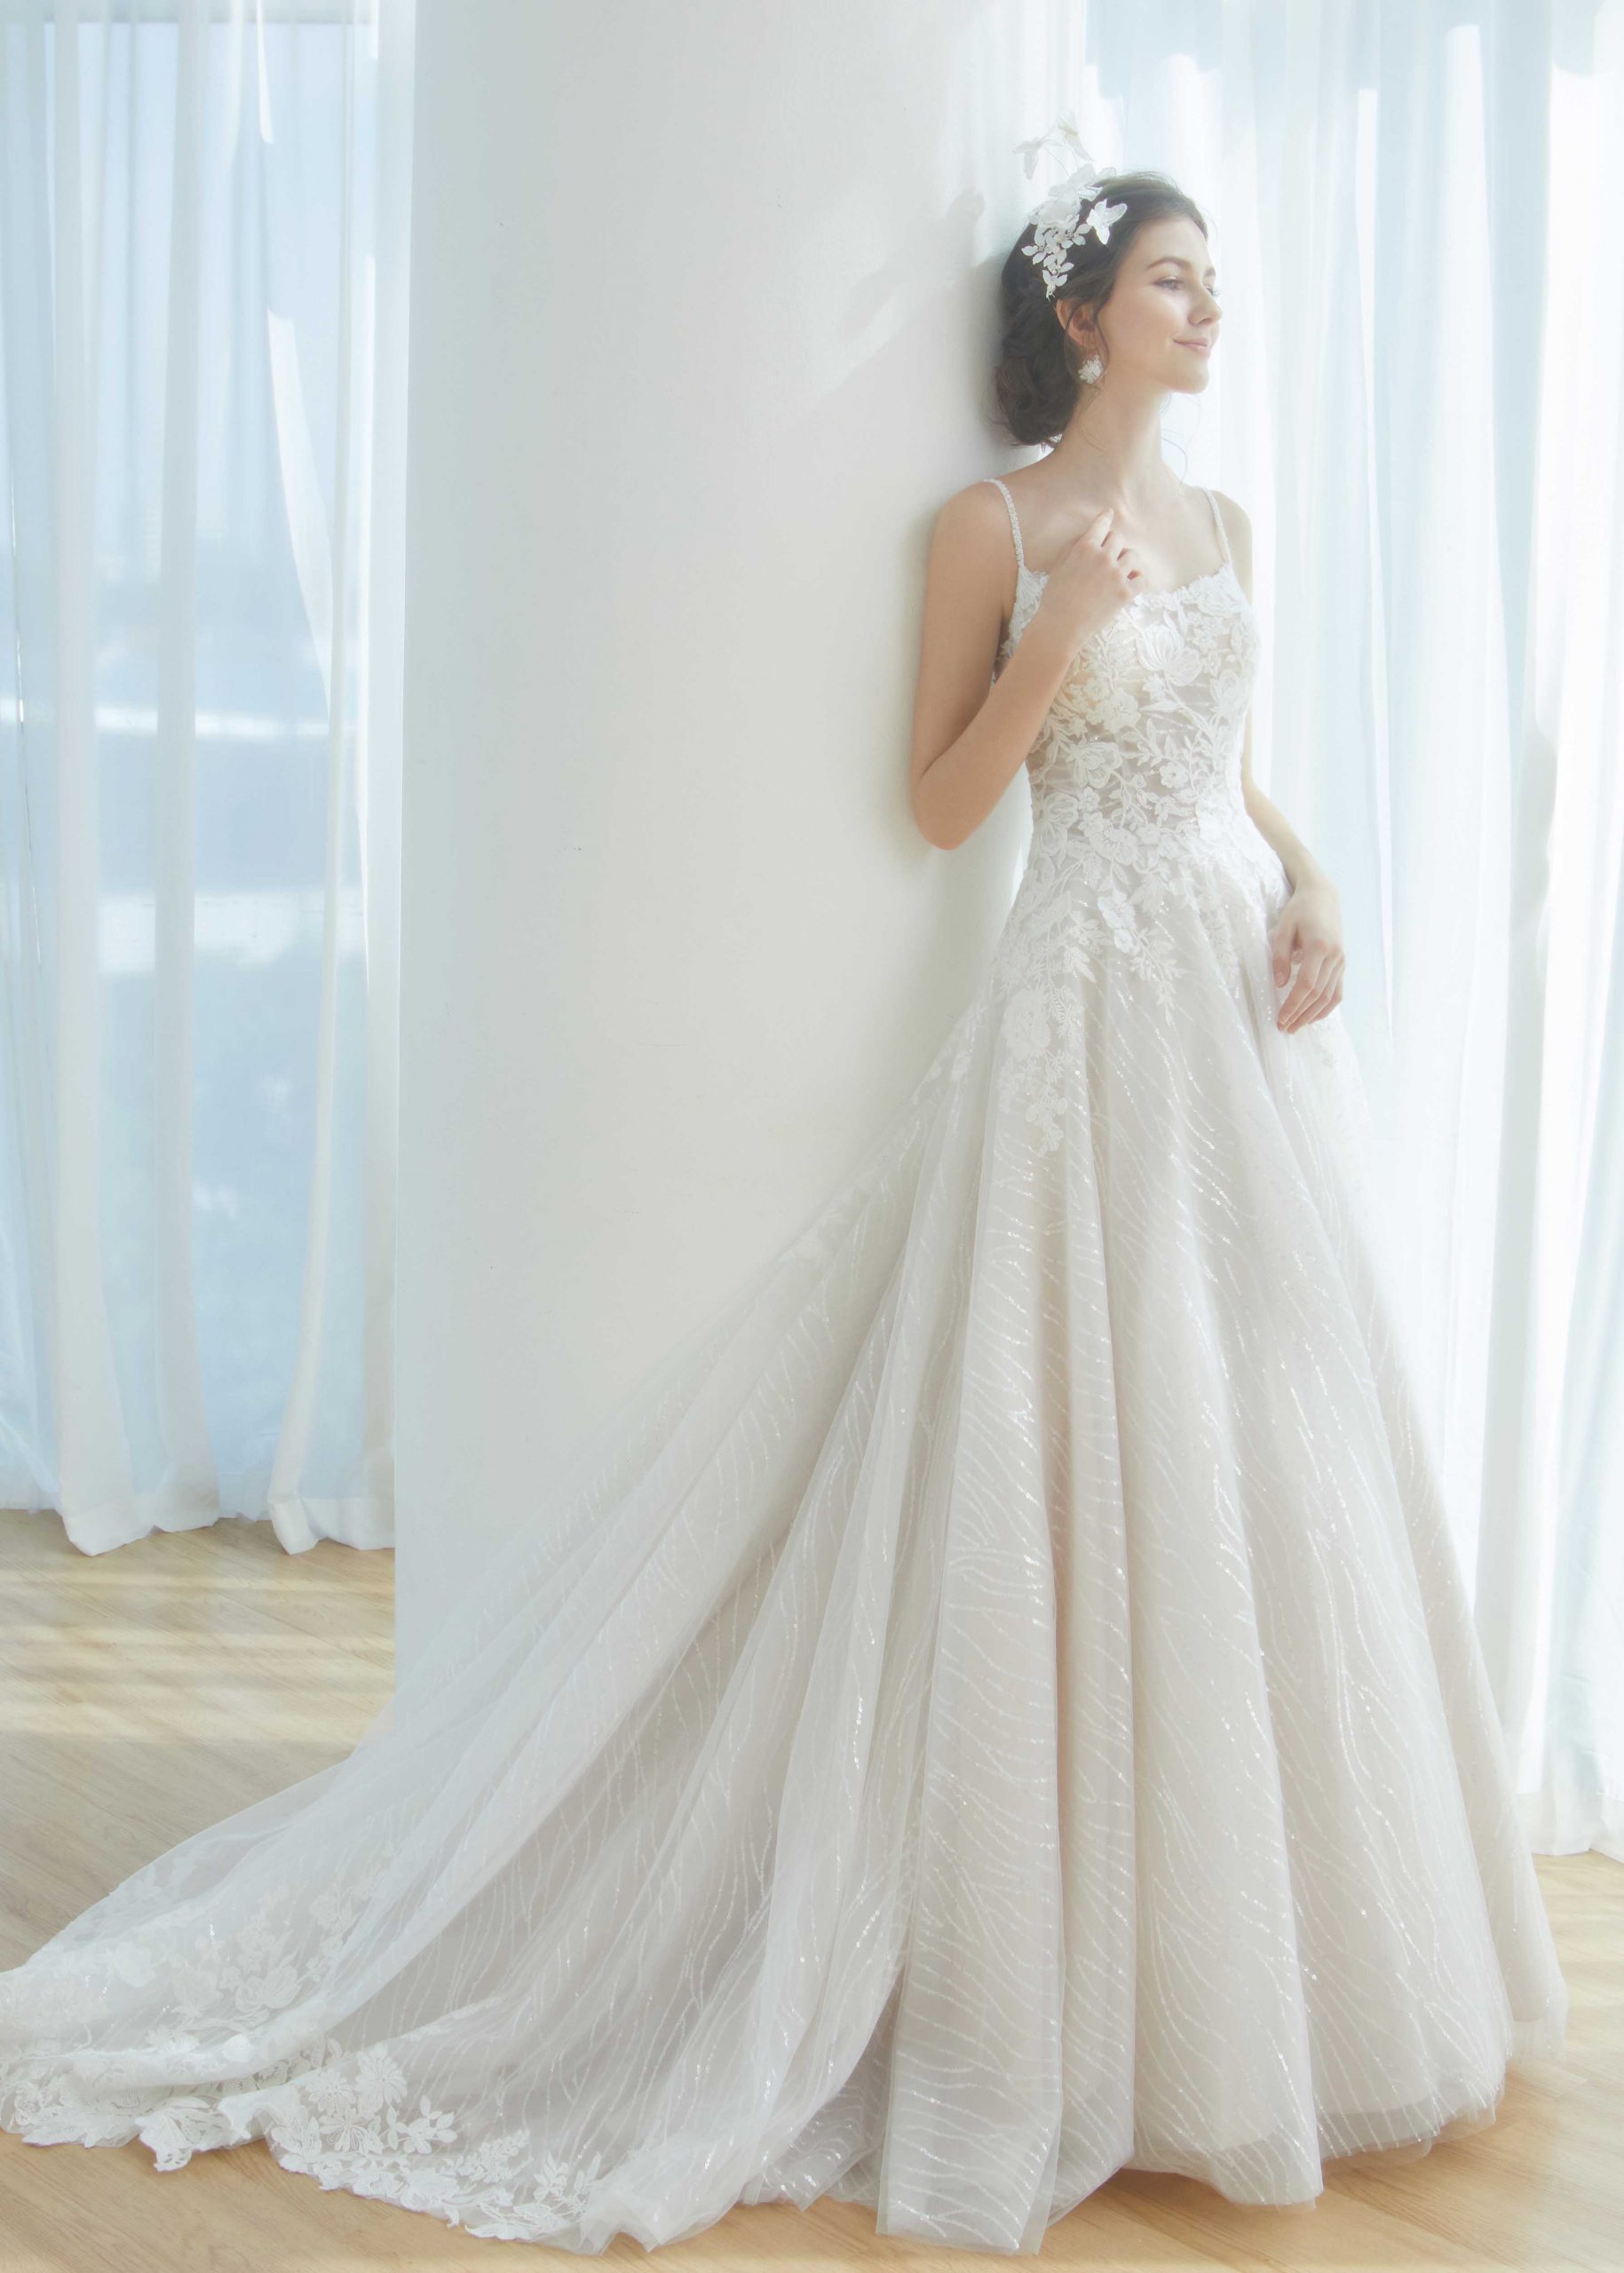 SKY BETWEEN THE BRANCHES - Rico-A-Mona Bridal